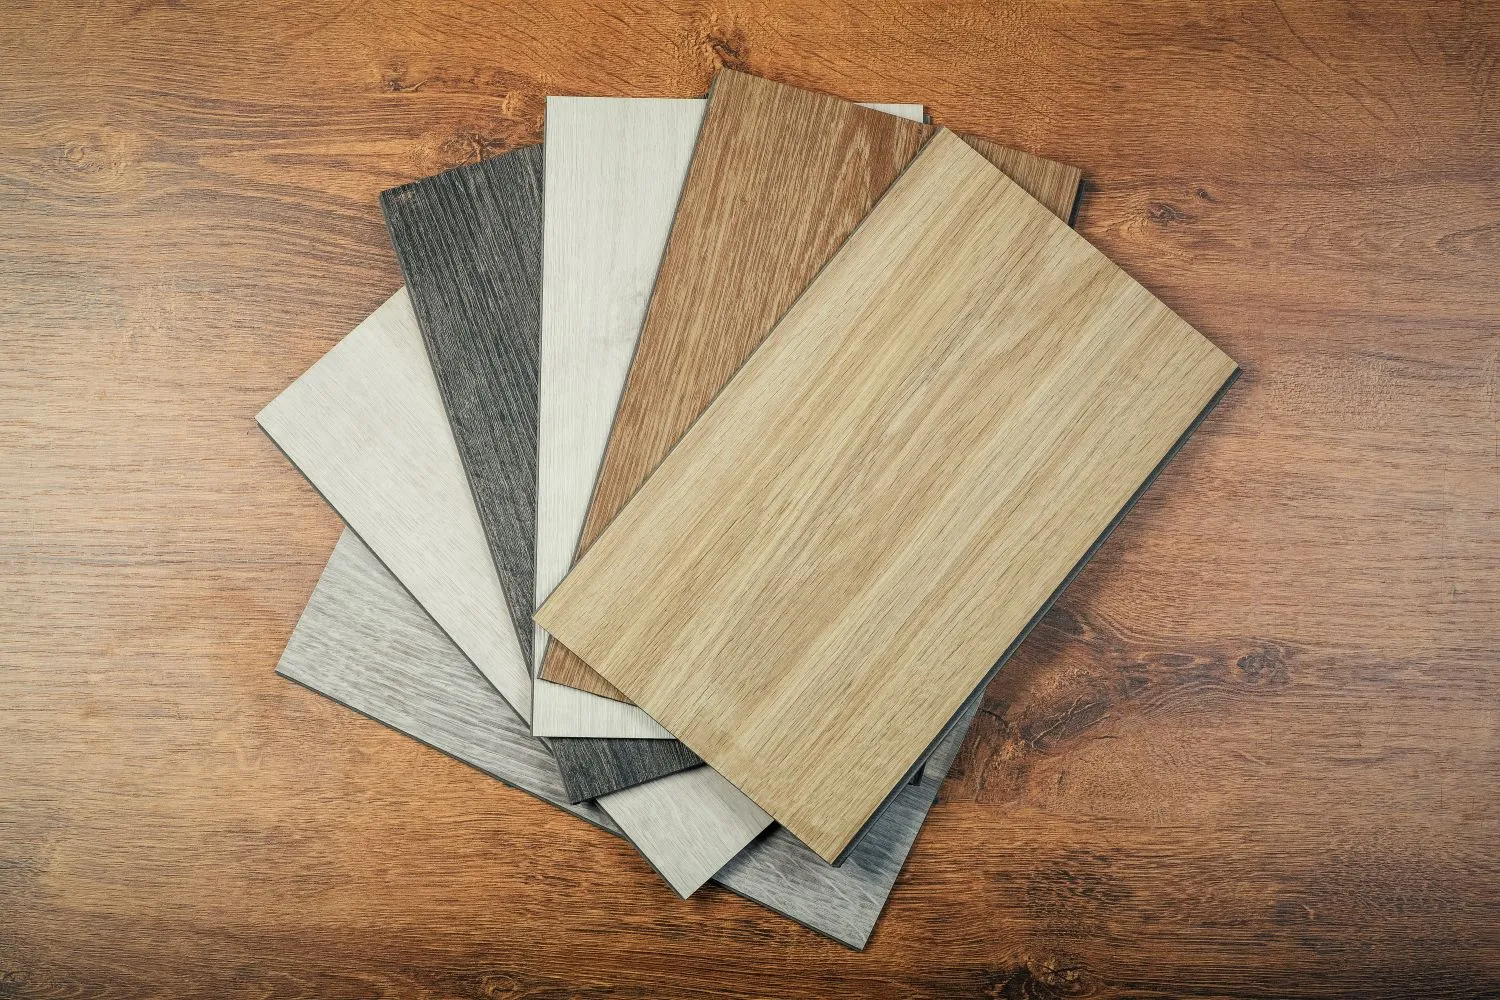 Wood veneer sheets are made from natural wood, which means they showcase the beauty of real wood.